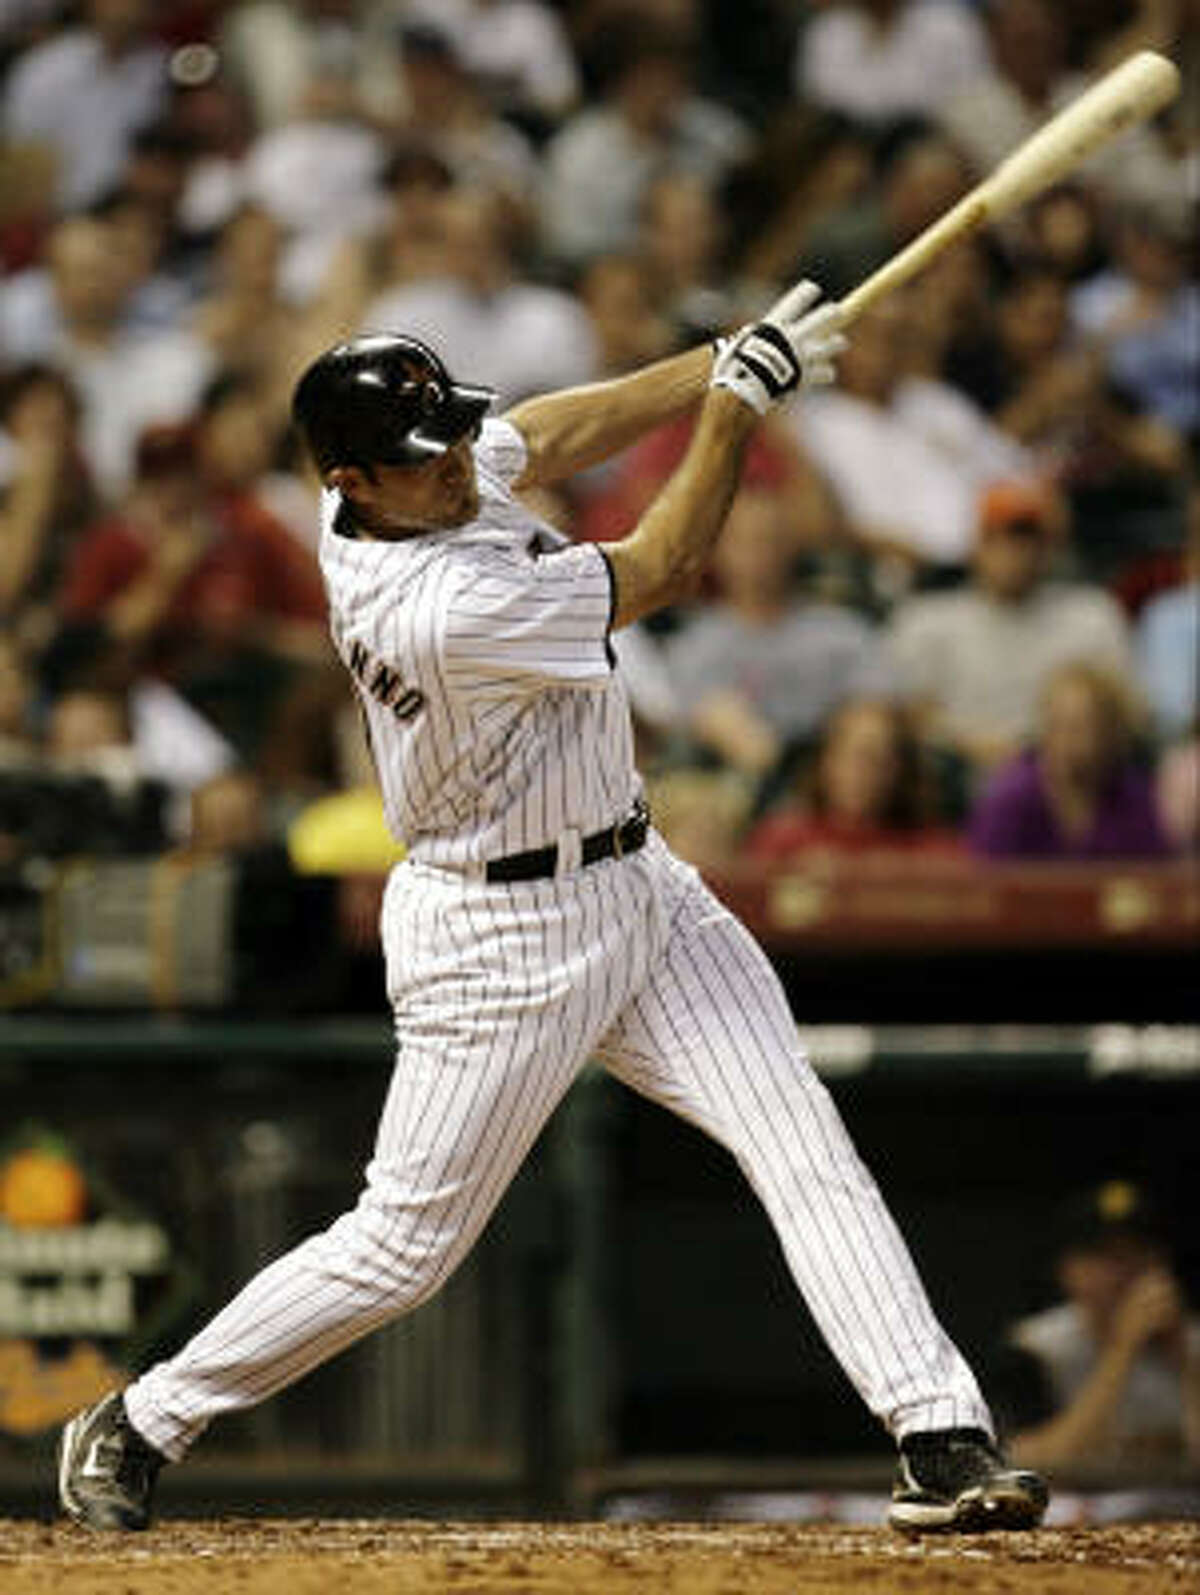 Mark Saccomanno hits a home run in the fifth inning against the Pittsburgh Pirates on Monday at Minute Maid Park.